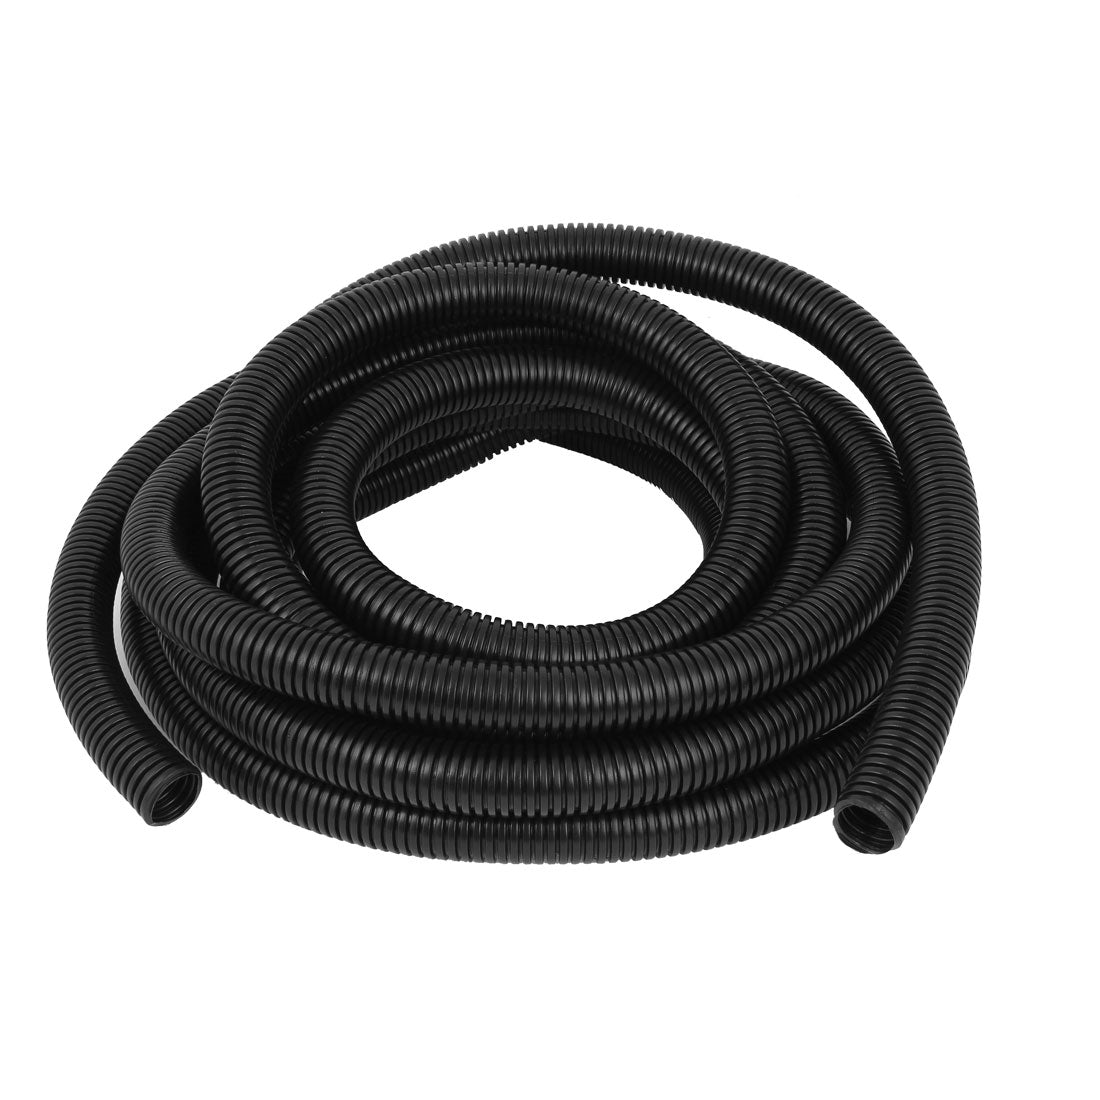 uxcell Uxcell 7 M 21 x 25 mm Nylon Flexible Corrugated Conduit Tube for Garden,Office Black